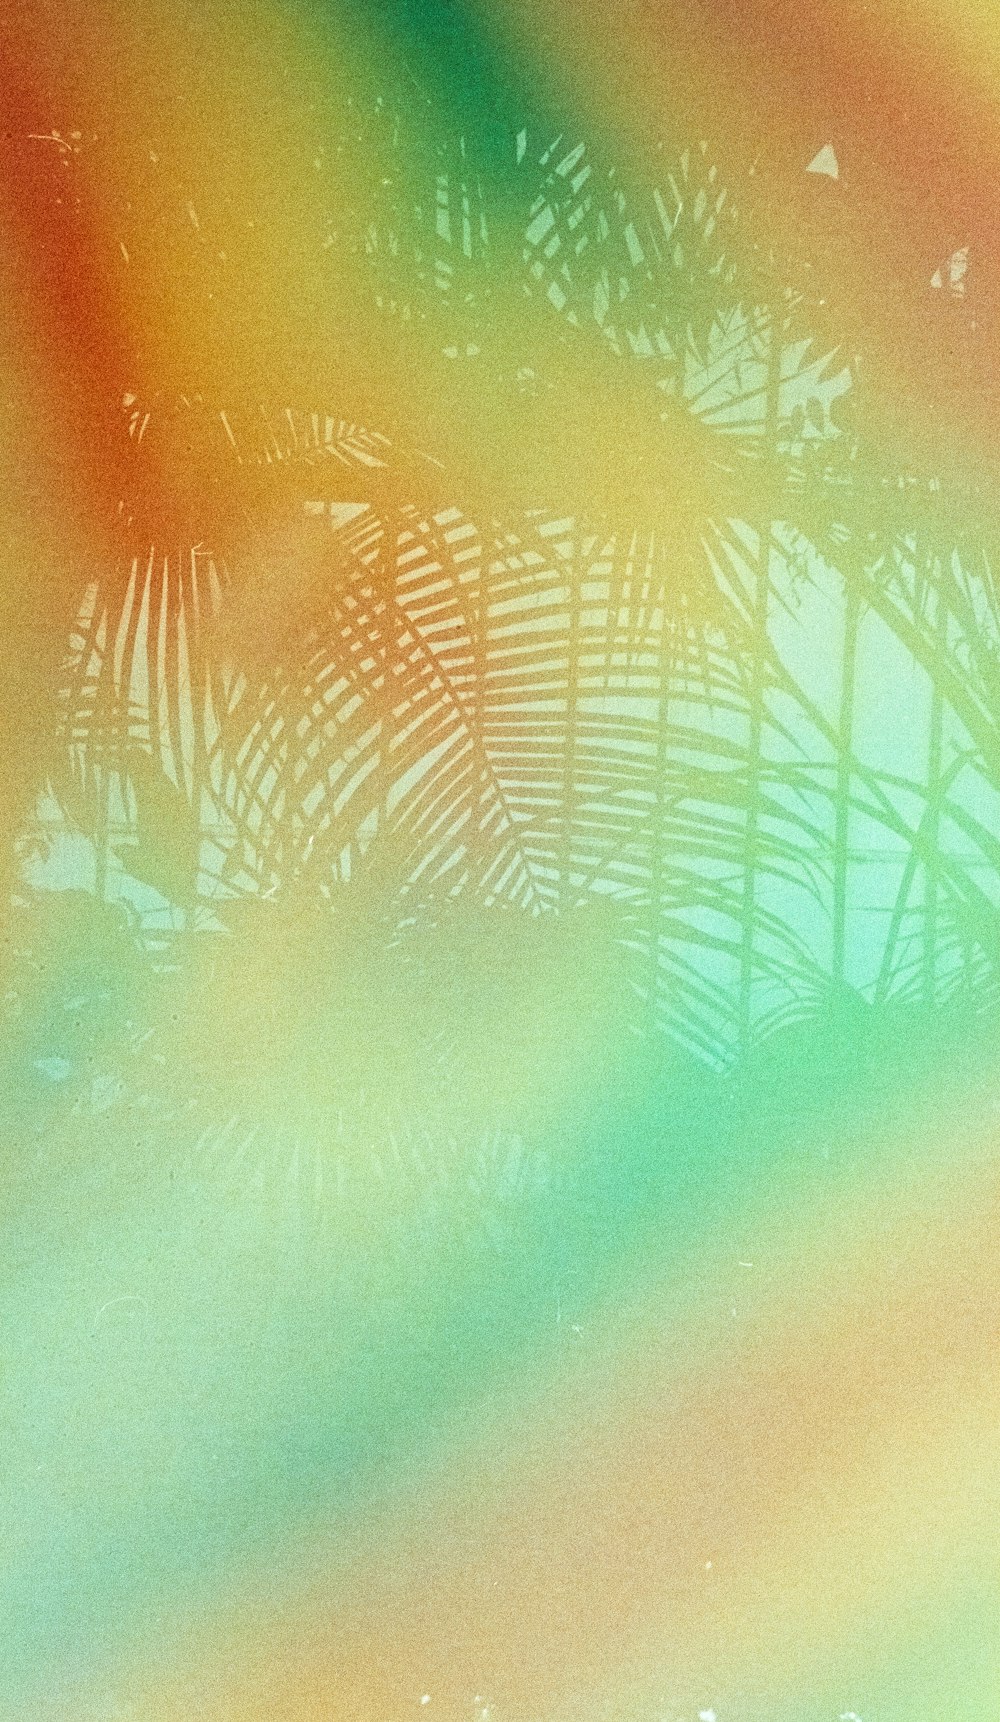 a blurry image of a palm tree with a rainbow colored background